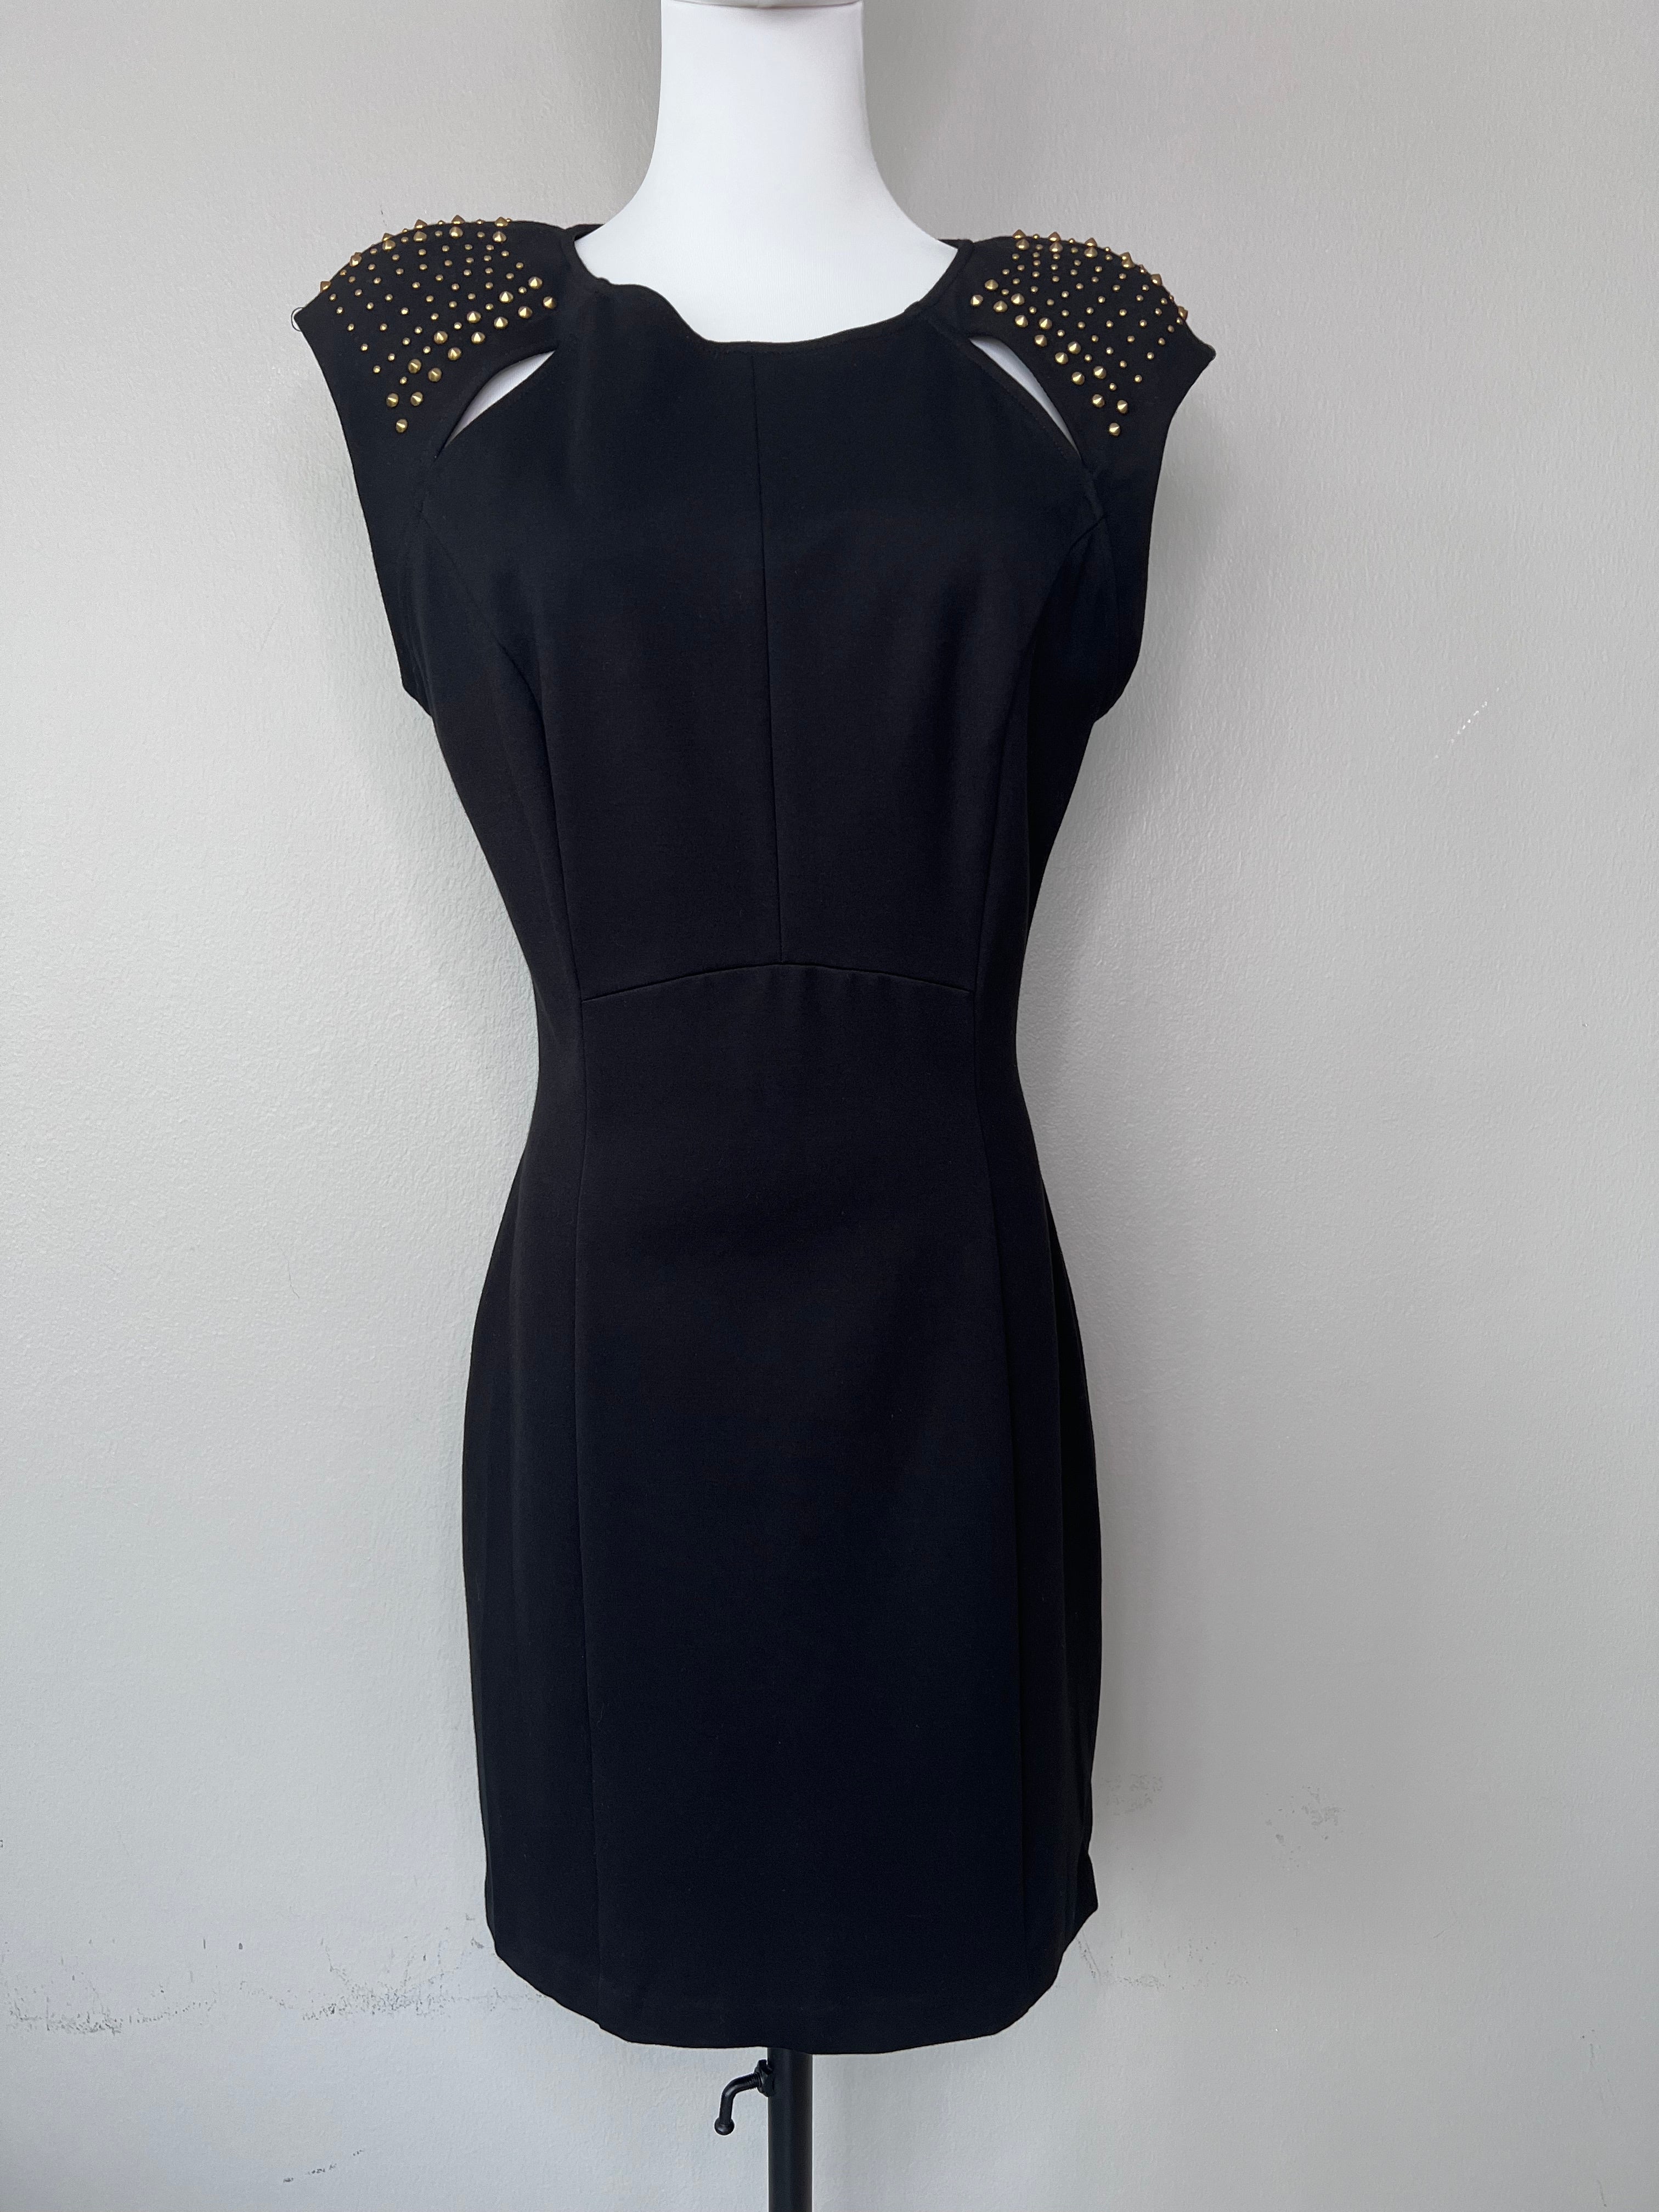 Black short dress with studded gold sleeves - ABS